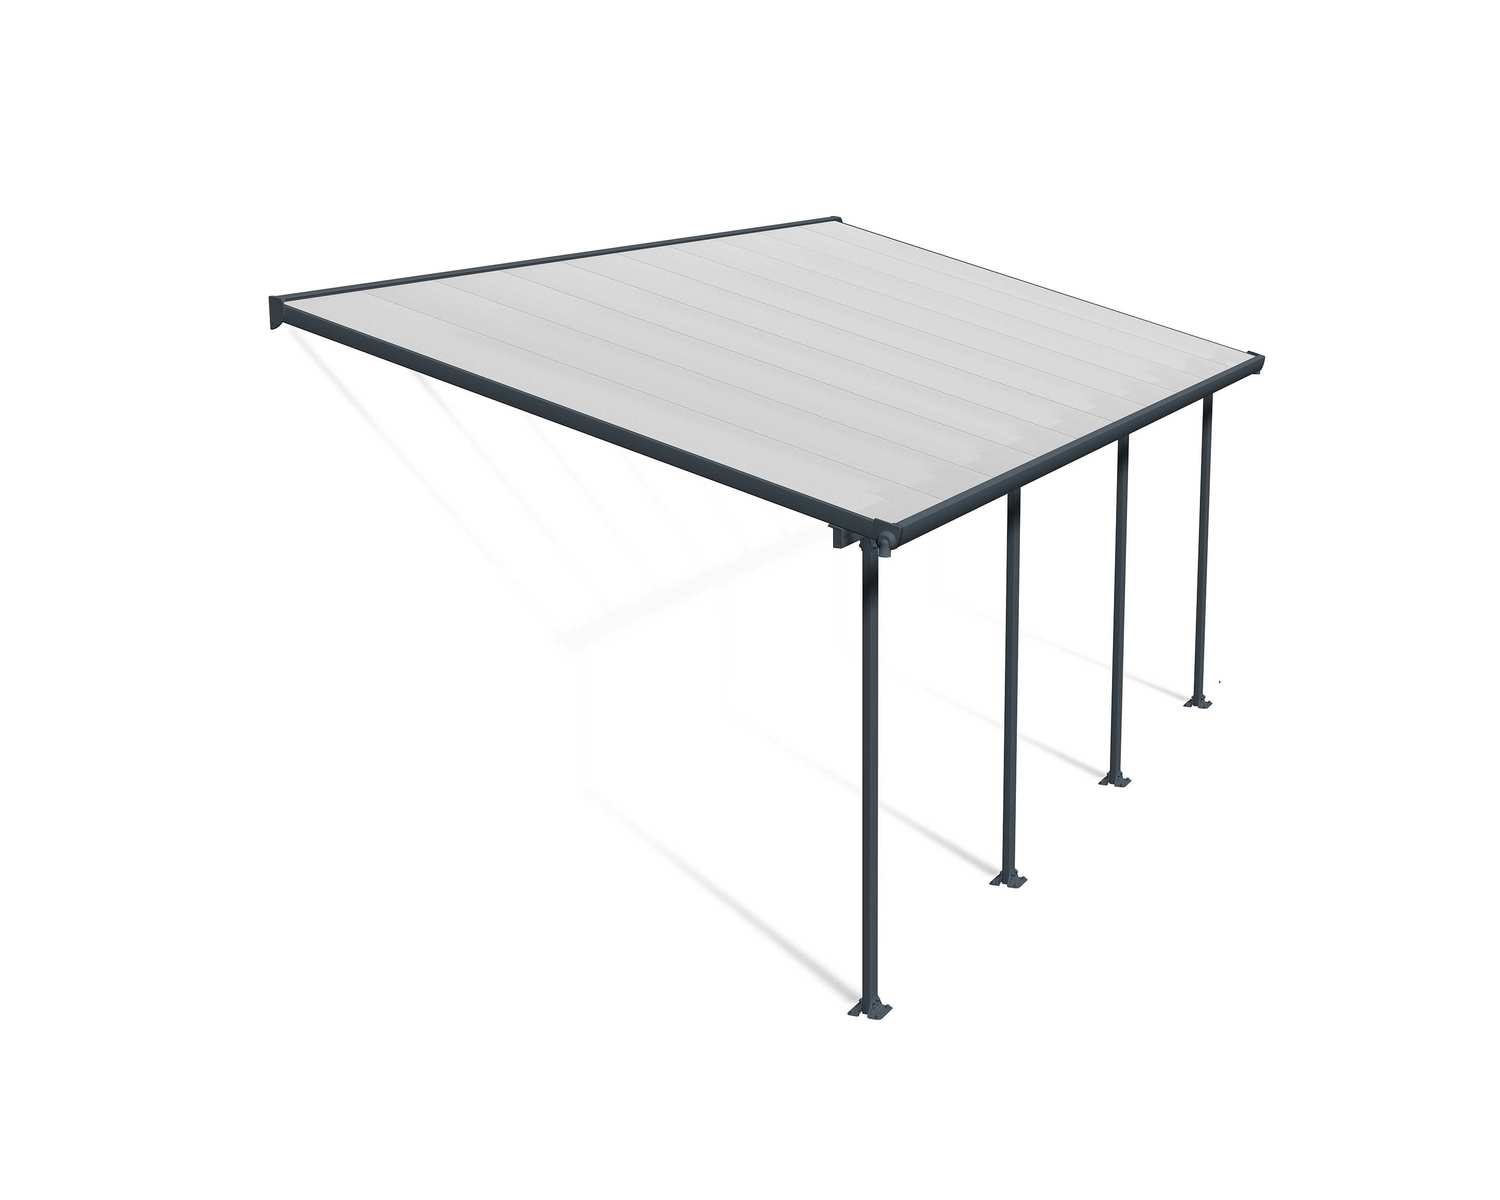 Feria 10 ft. x 20 ft. Grey Aluminium Patio Cover With 4 Posts, Clear Twin-Wall Polycarbonate Roof Panels.